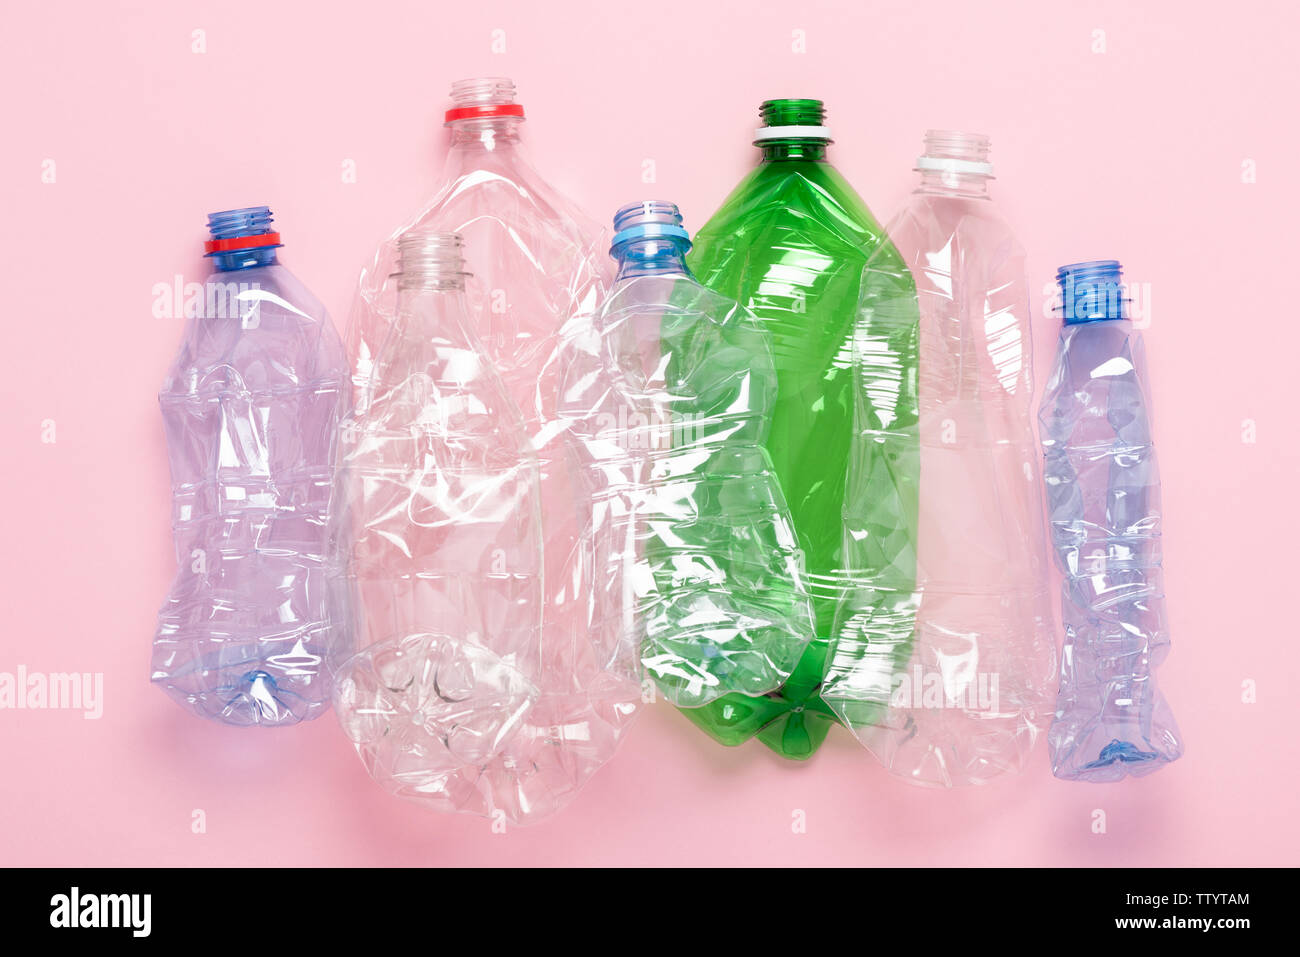 Plastic waste bottles top view. Eco plastic recycling concept. Stock Photo